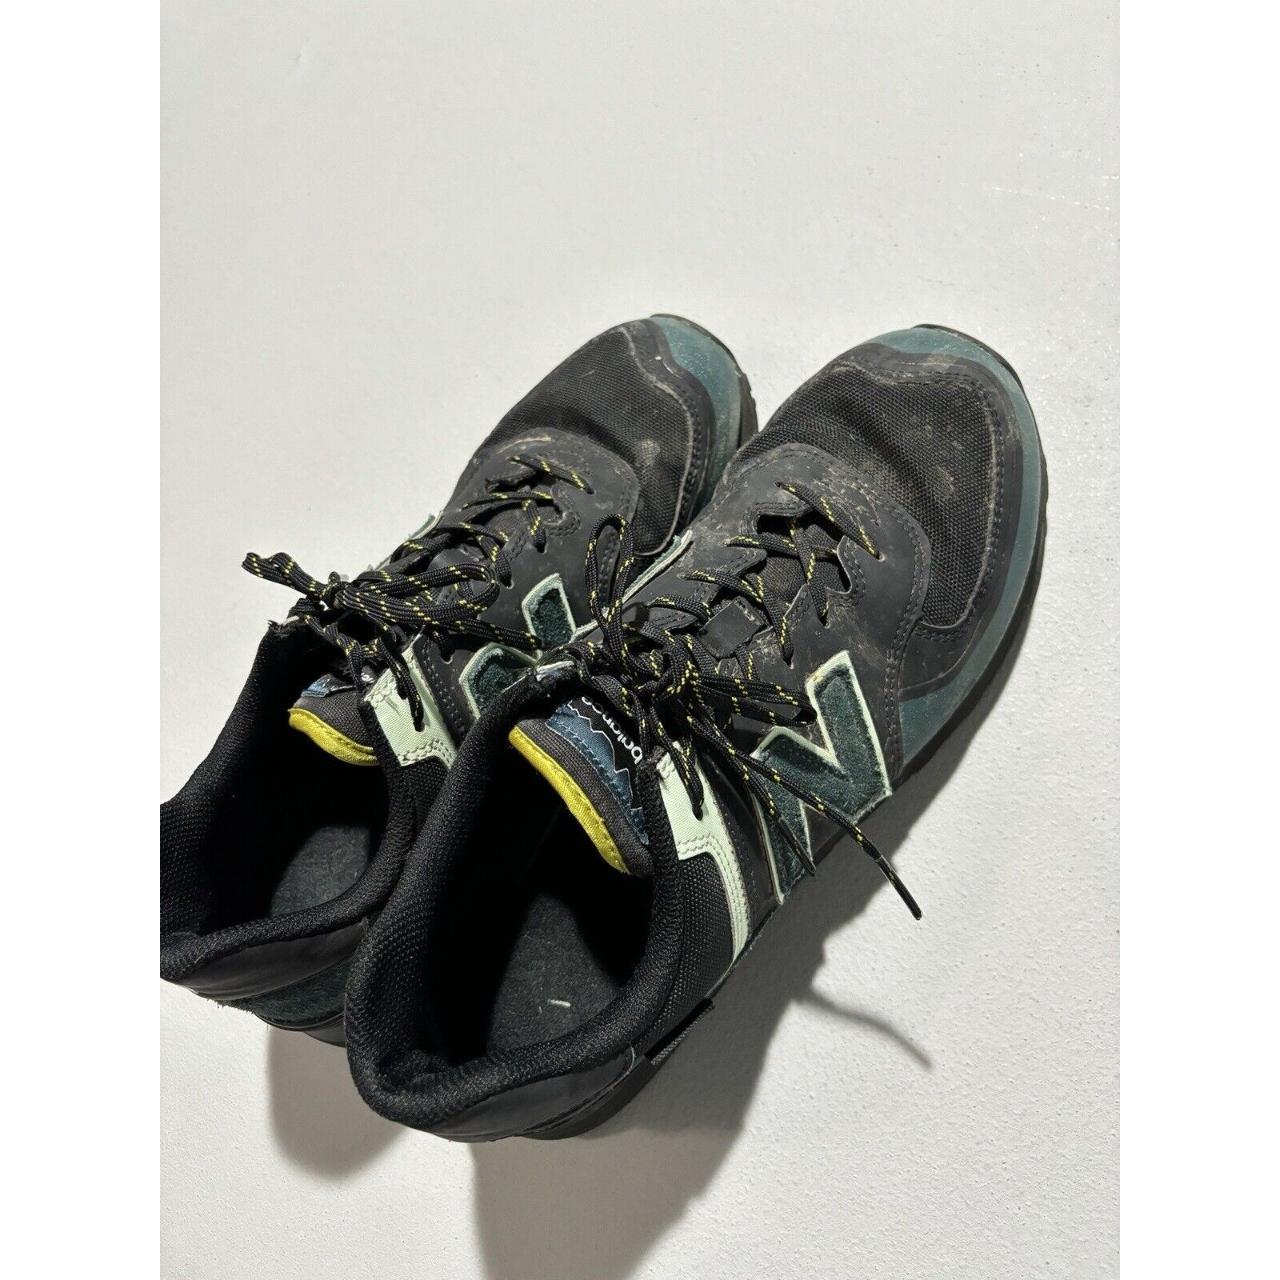 New Balance Men's Green and Black Trainers (2)